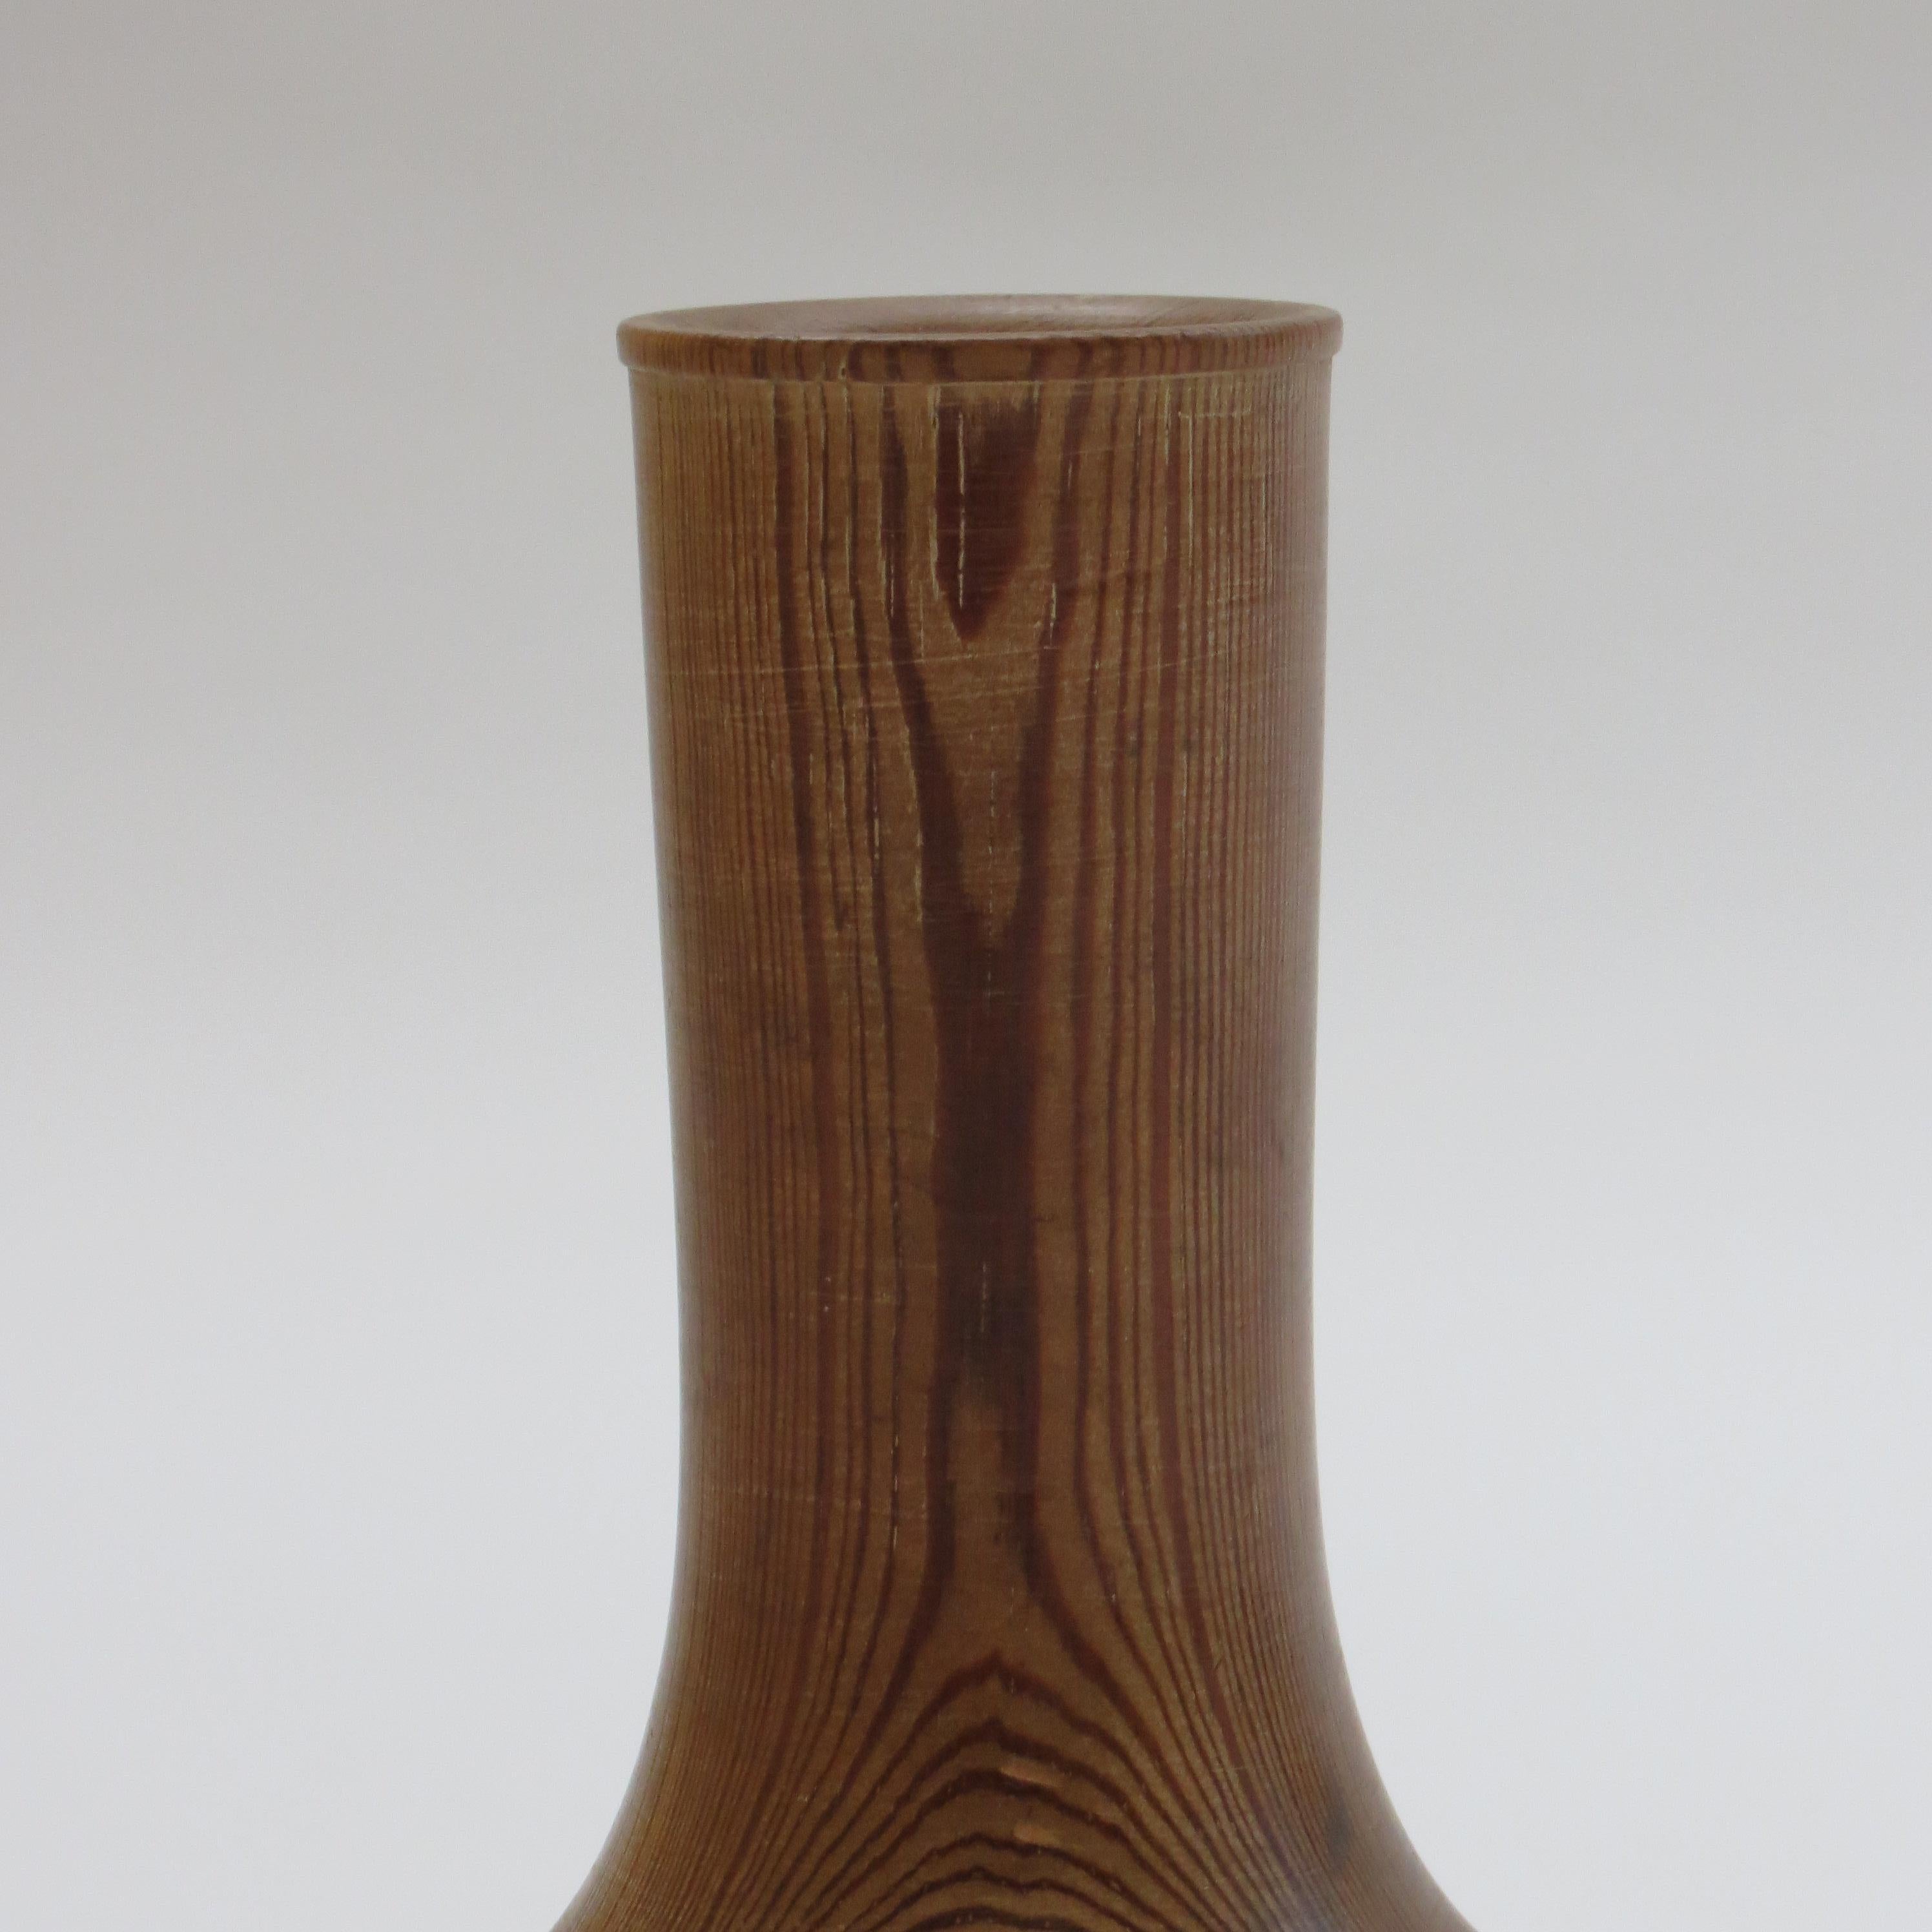 Hand Turned Vintage Pine Vase Sculpture In Good Condition For Sale In Stow on the Wold, GB